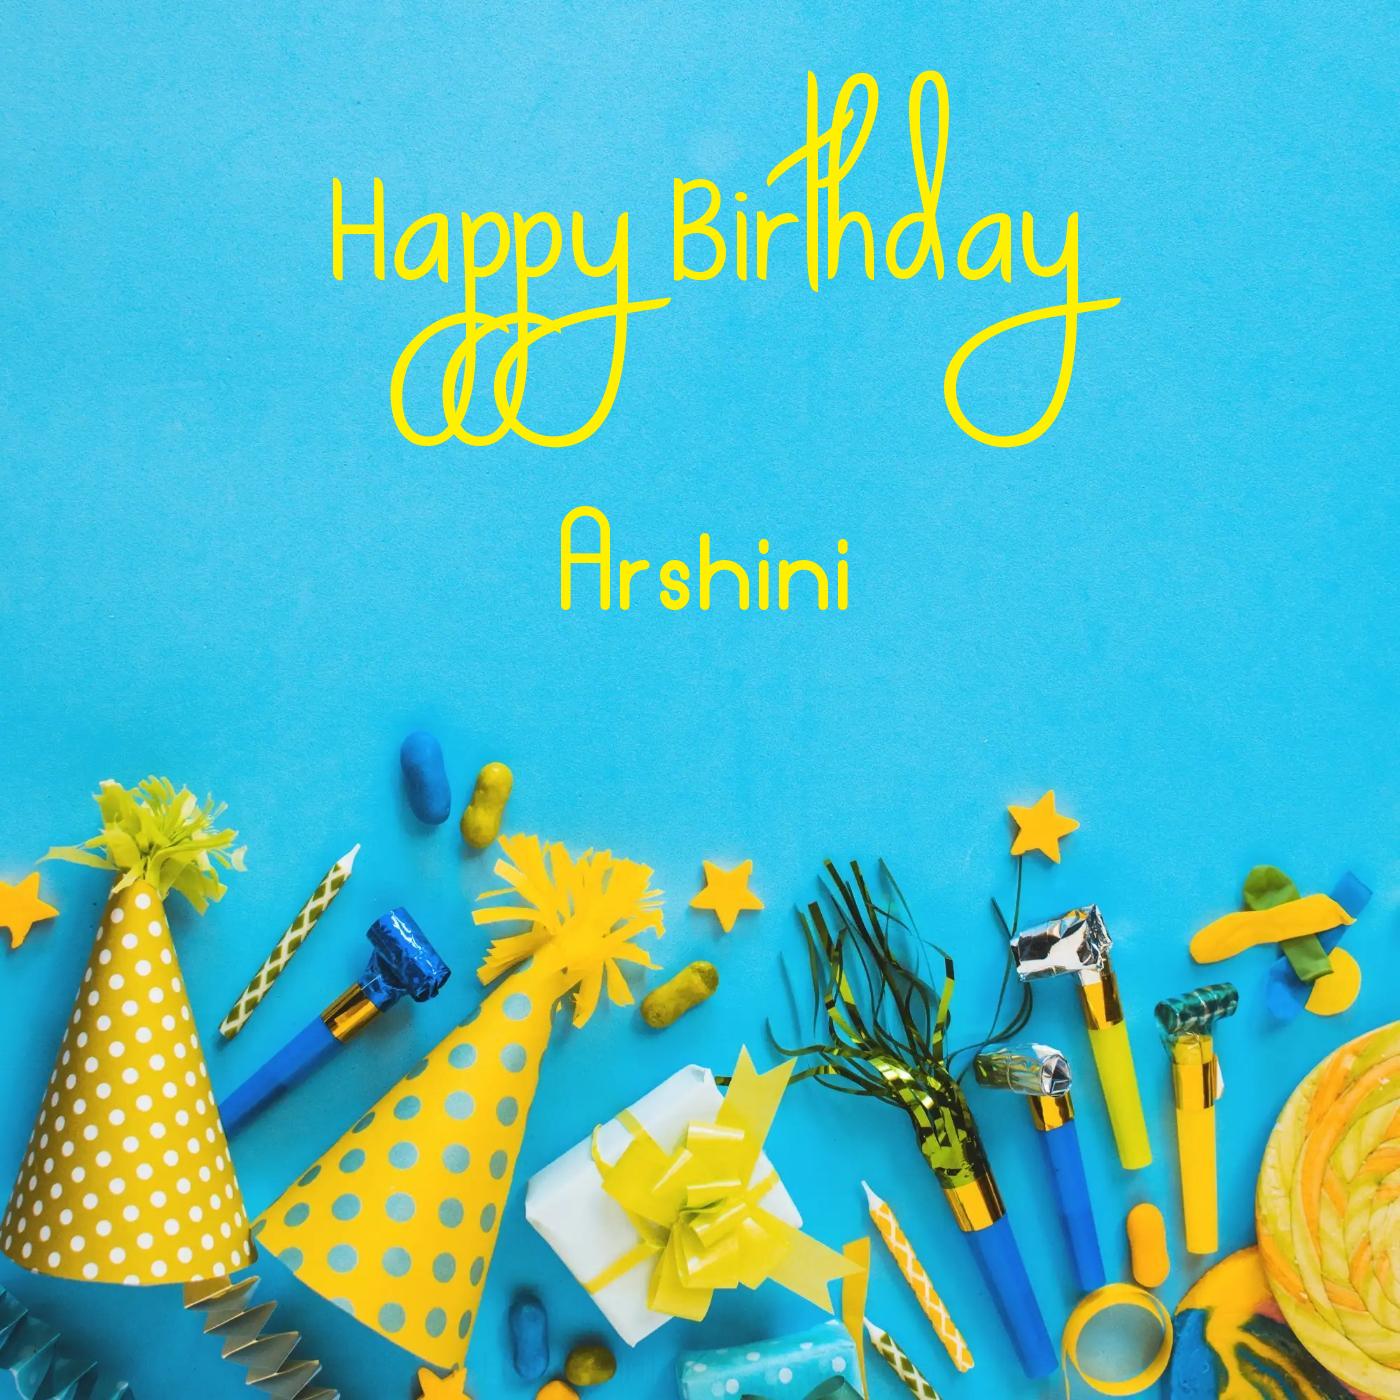 Happy Birthday Arshini Party Accessories Card